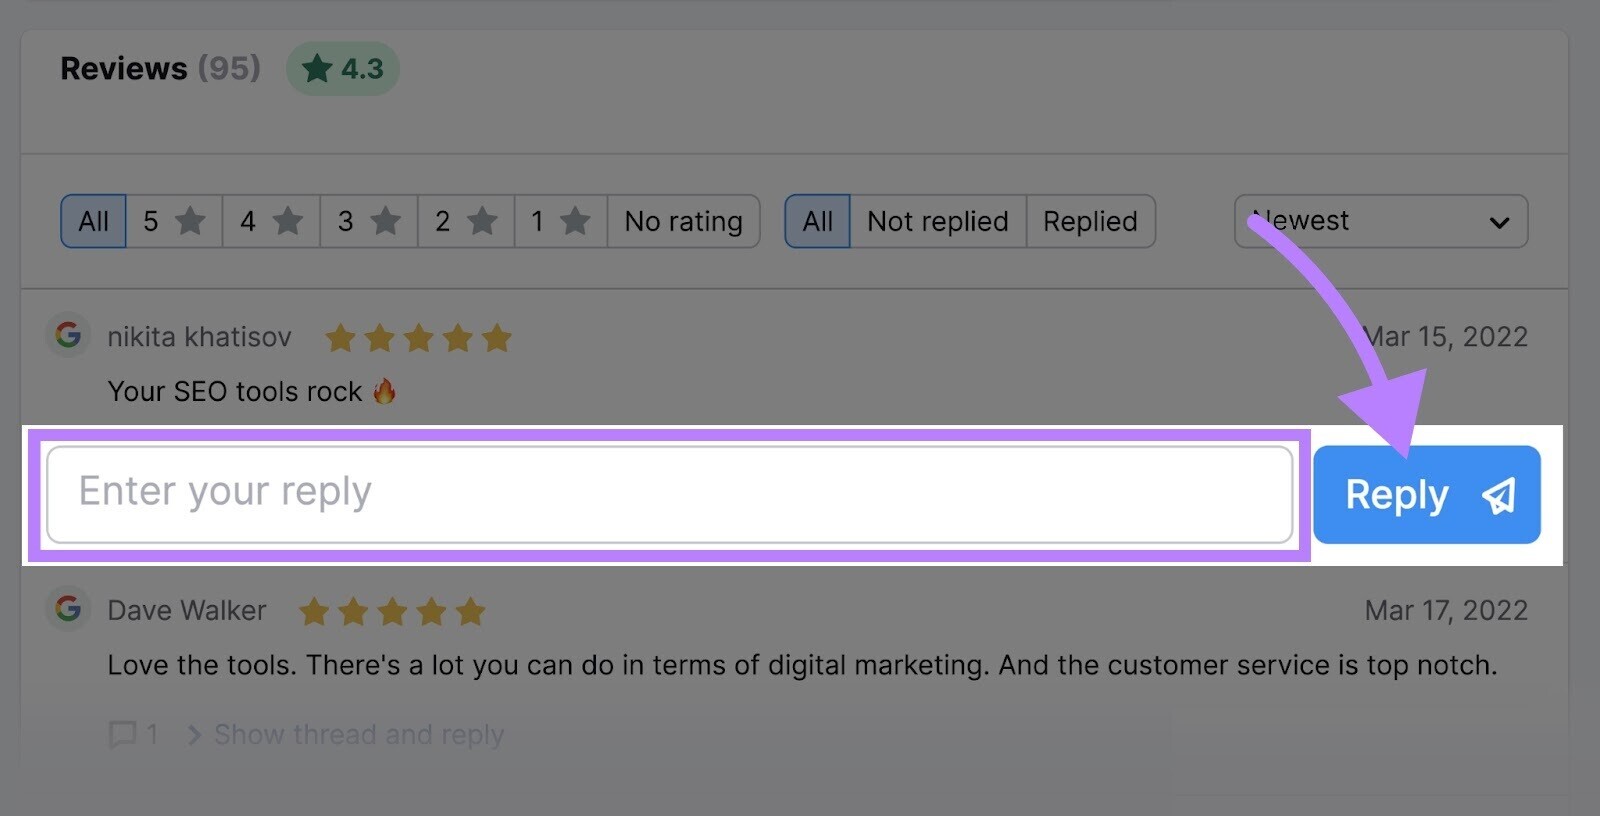 Replying to reviews from Review Management tool